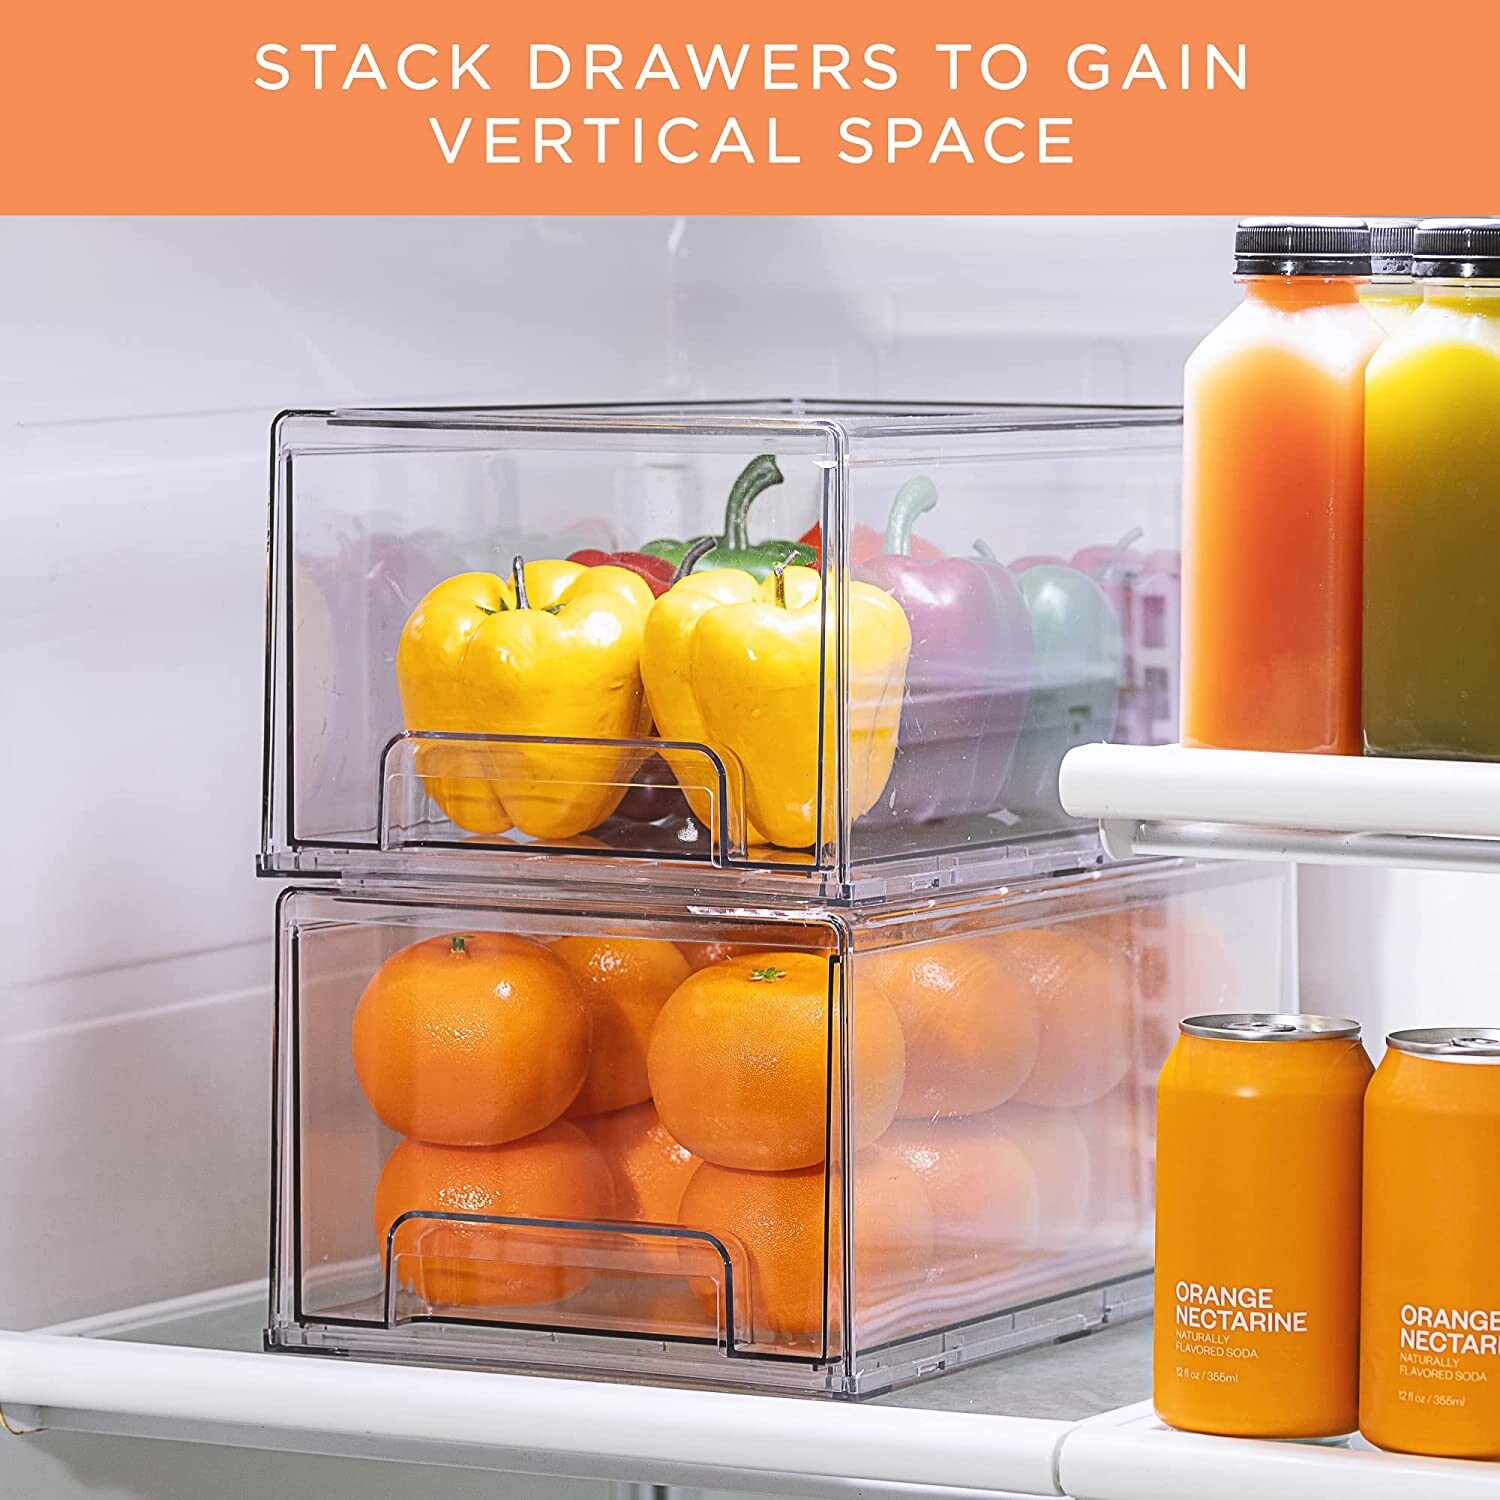 https://ak1.ostkcdn.com/images/products/is/images/direct/2dd6cd0a5c1c74158d79042cbb7496838aa9ed8a/Sorbus-Fridge-Drawers---Clear-Stackable-Pull-Out-Refrigerator-Organizer-Bins-2-Pack%2C-Large.jpg